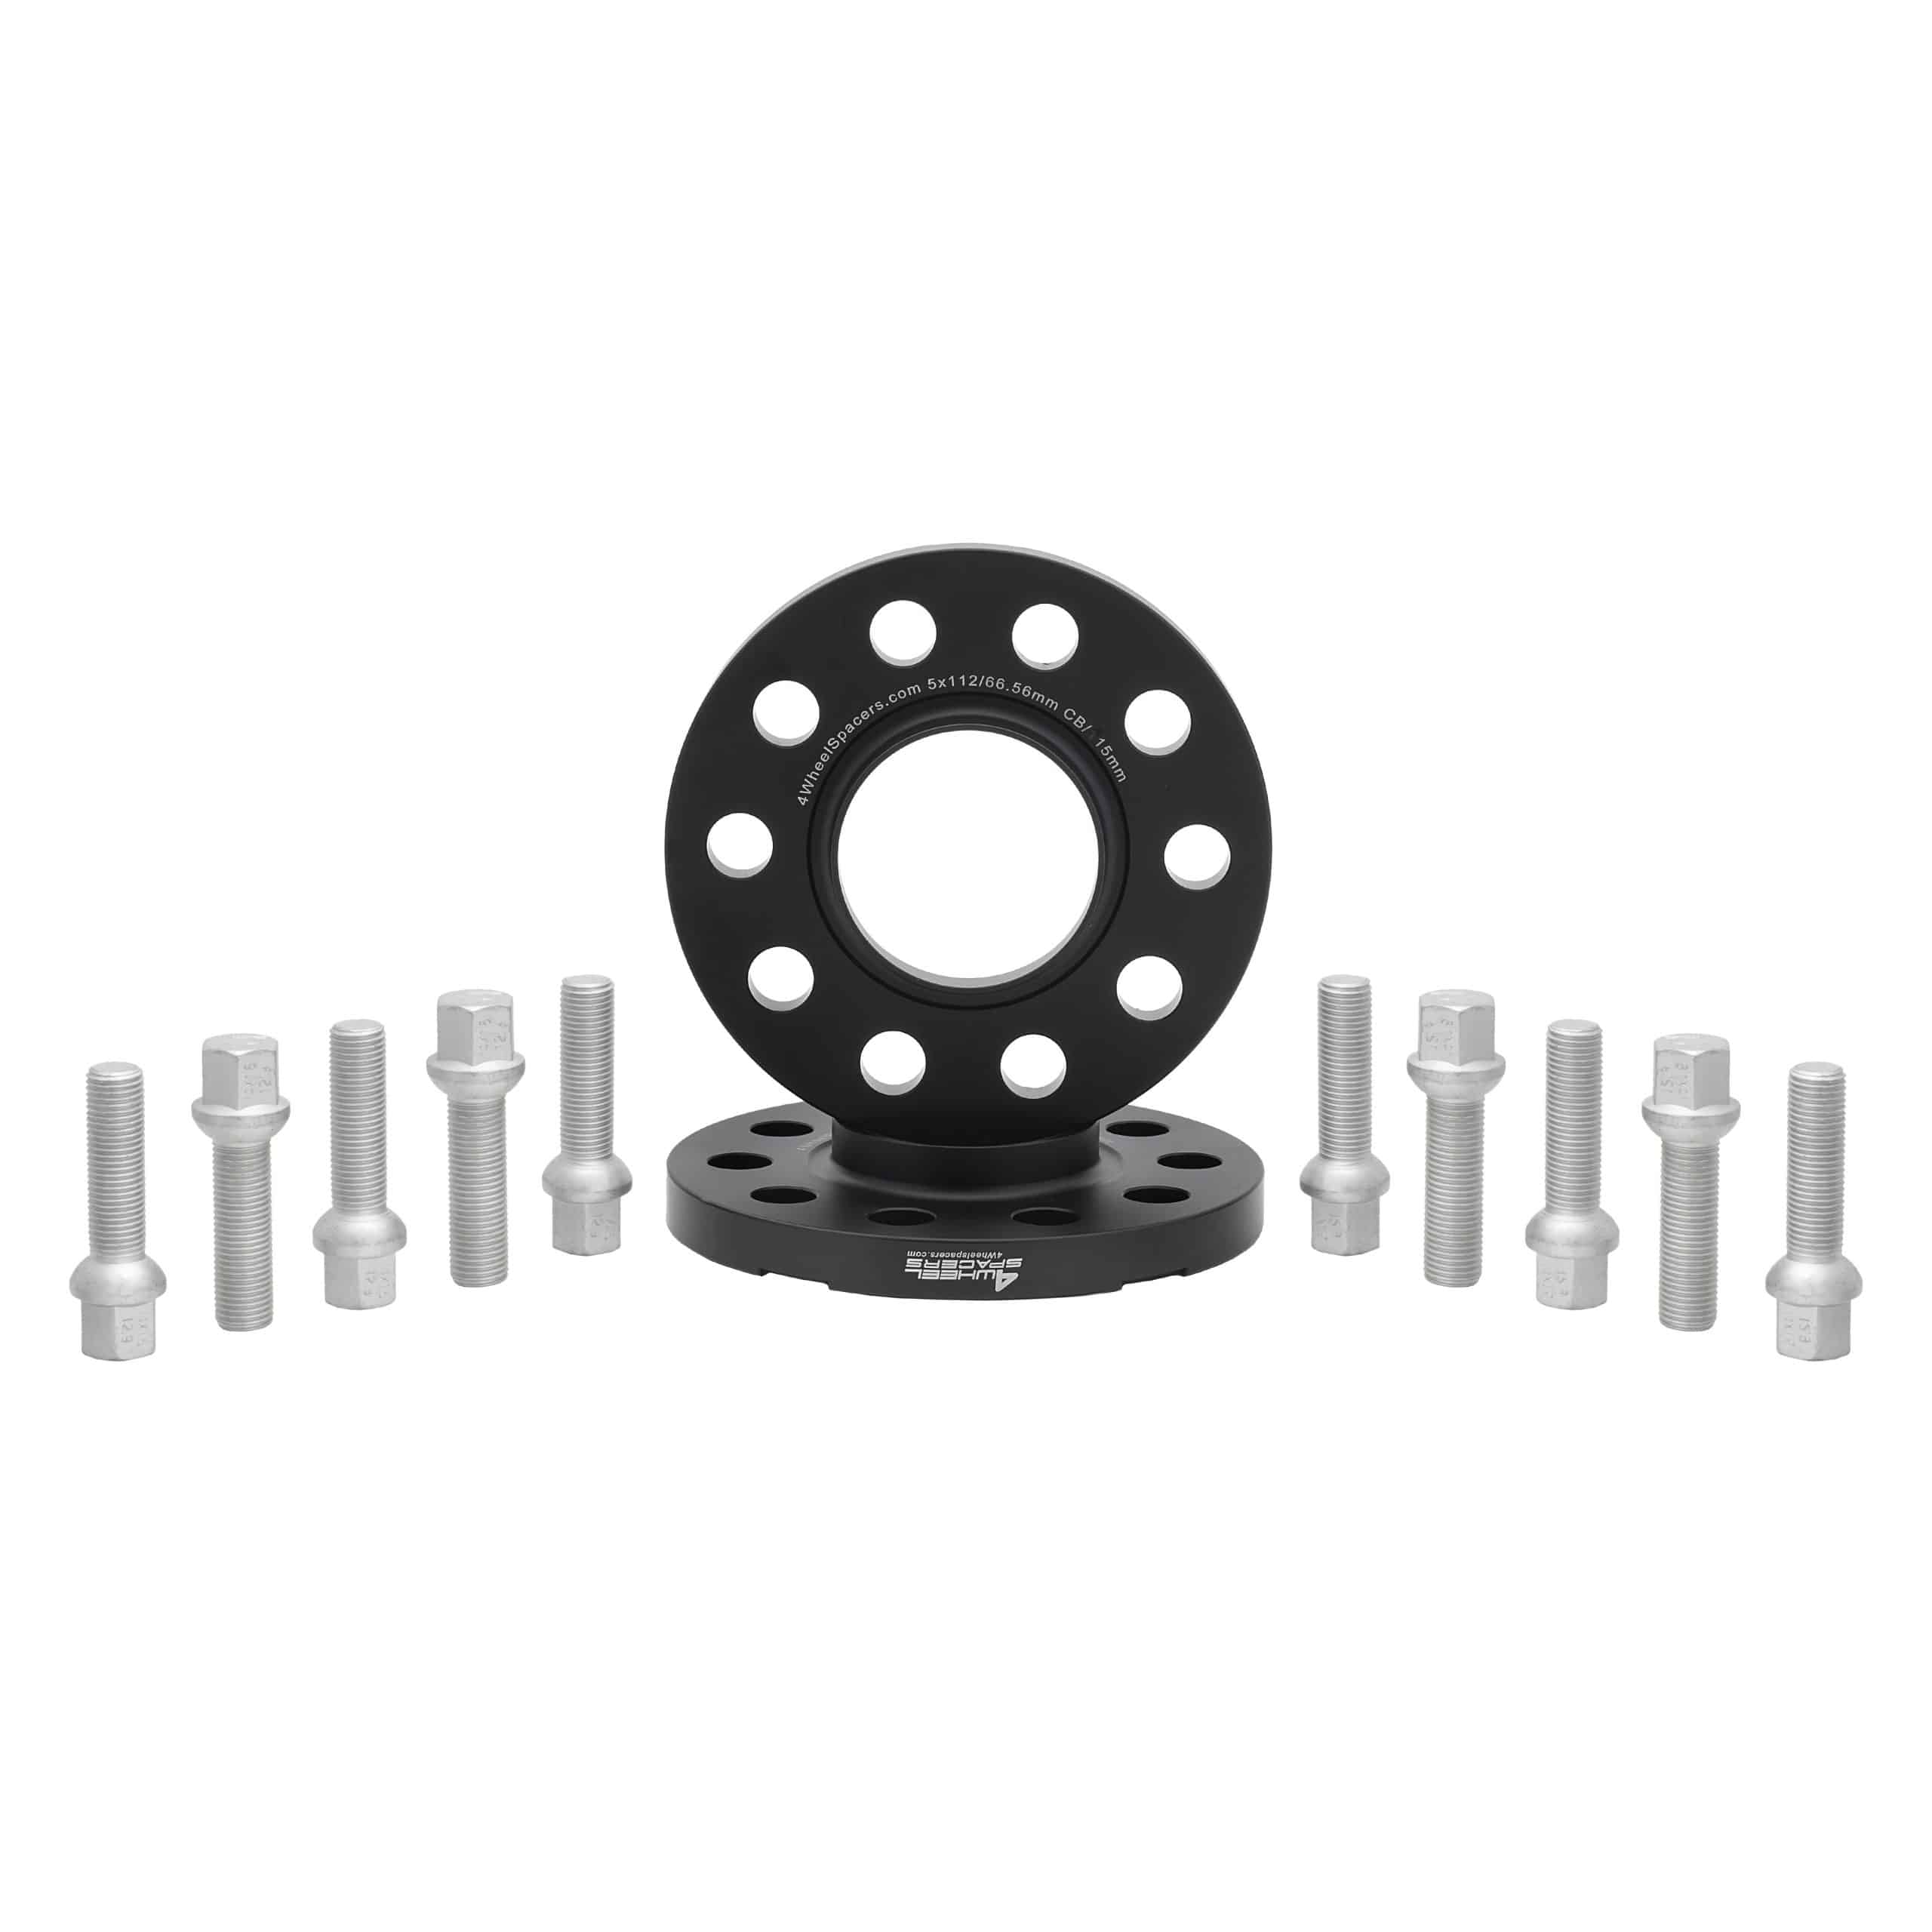 Audi 15mm Hub-Centric Wheel Spacers With Ball Seat Bolt Kit, 4WheelSpacers.com